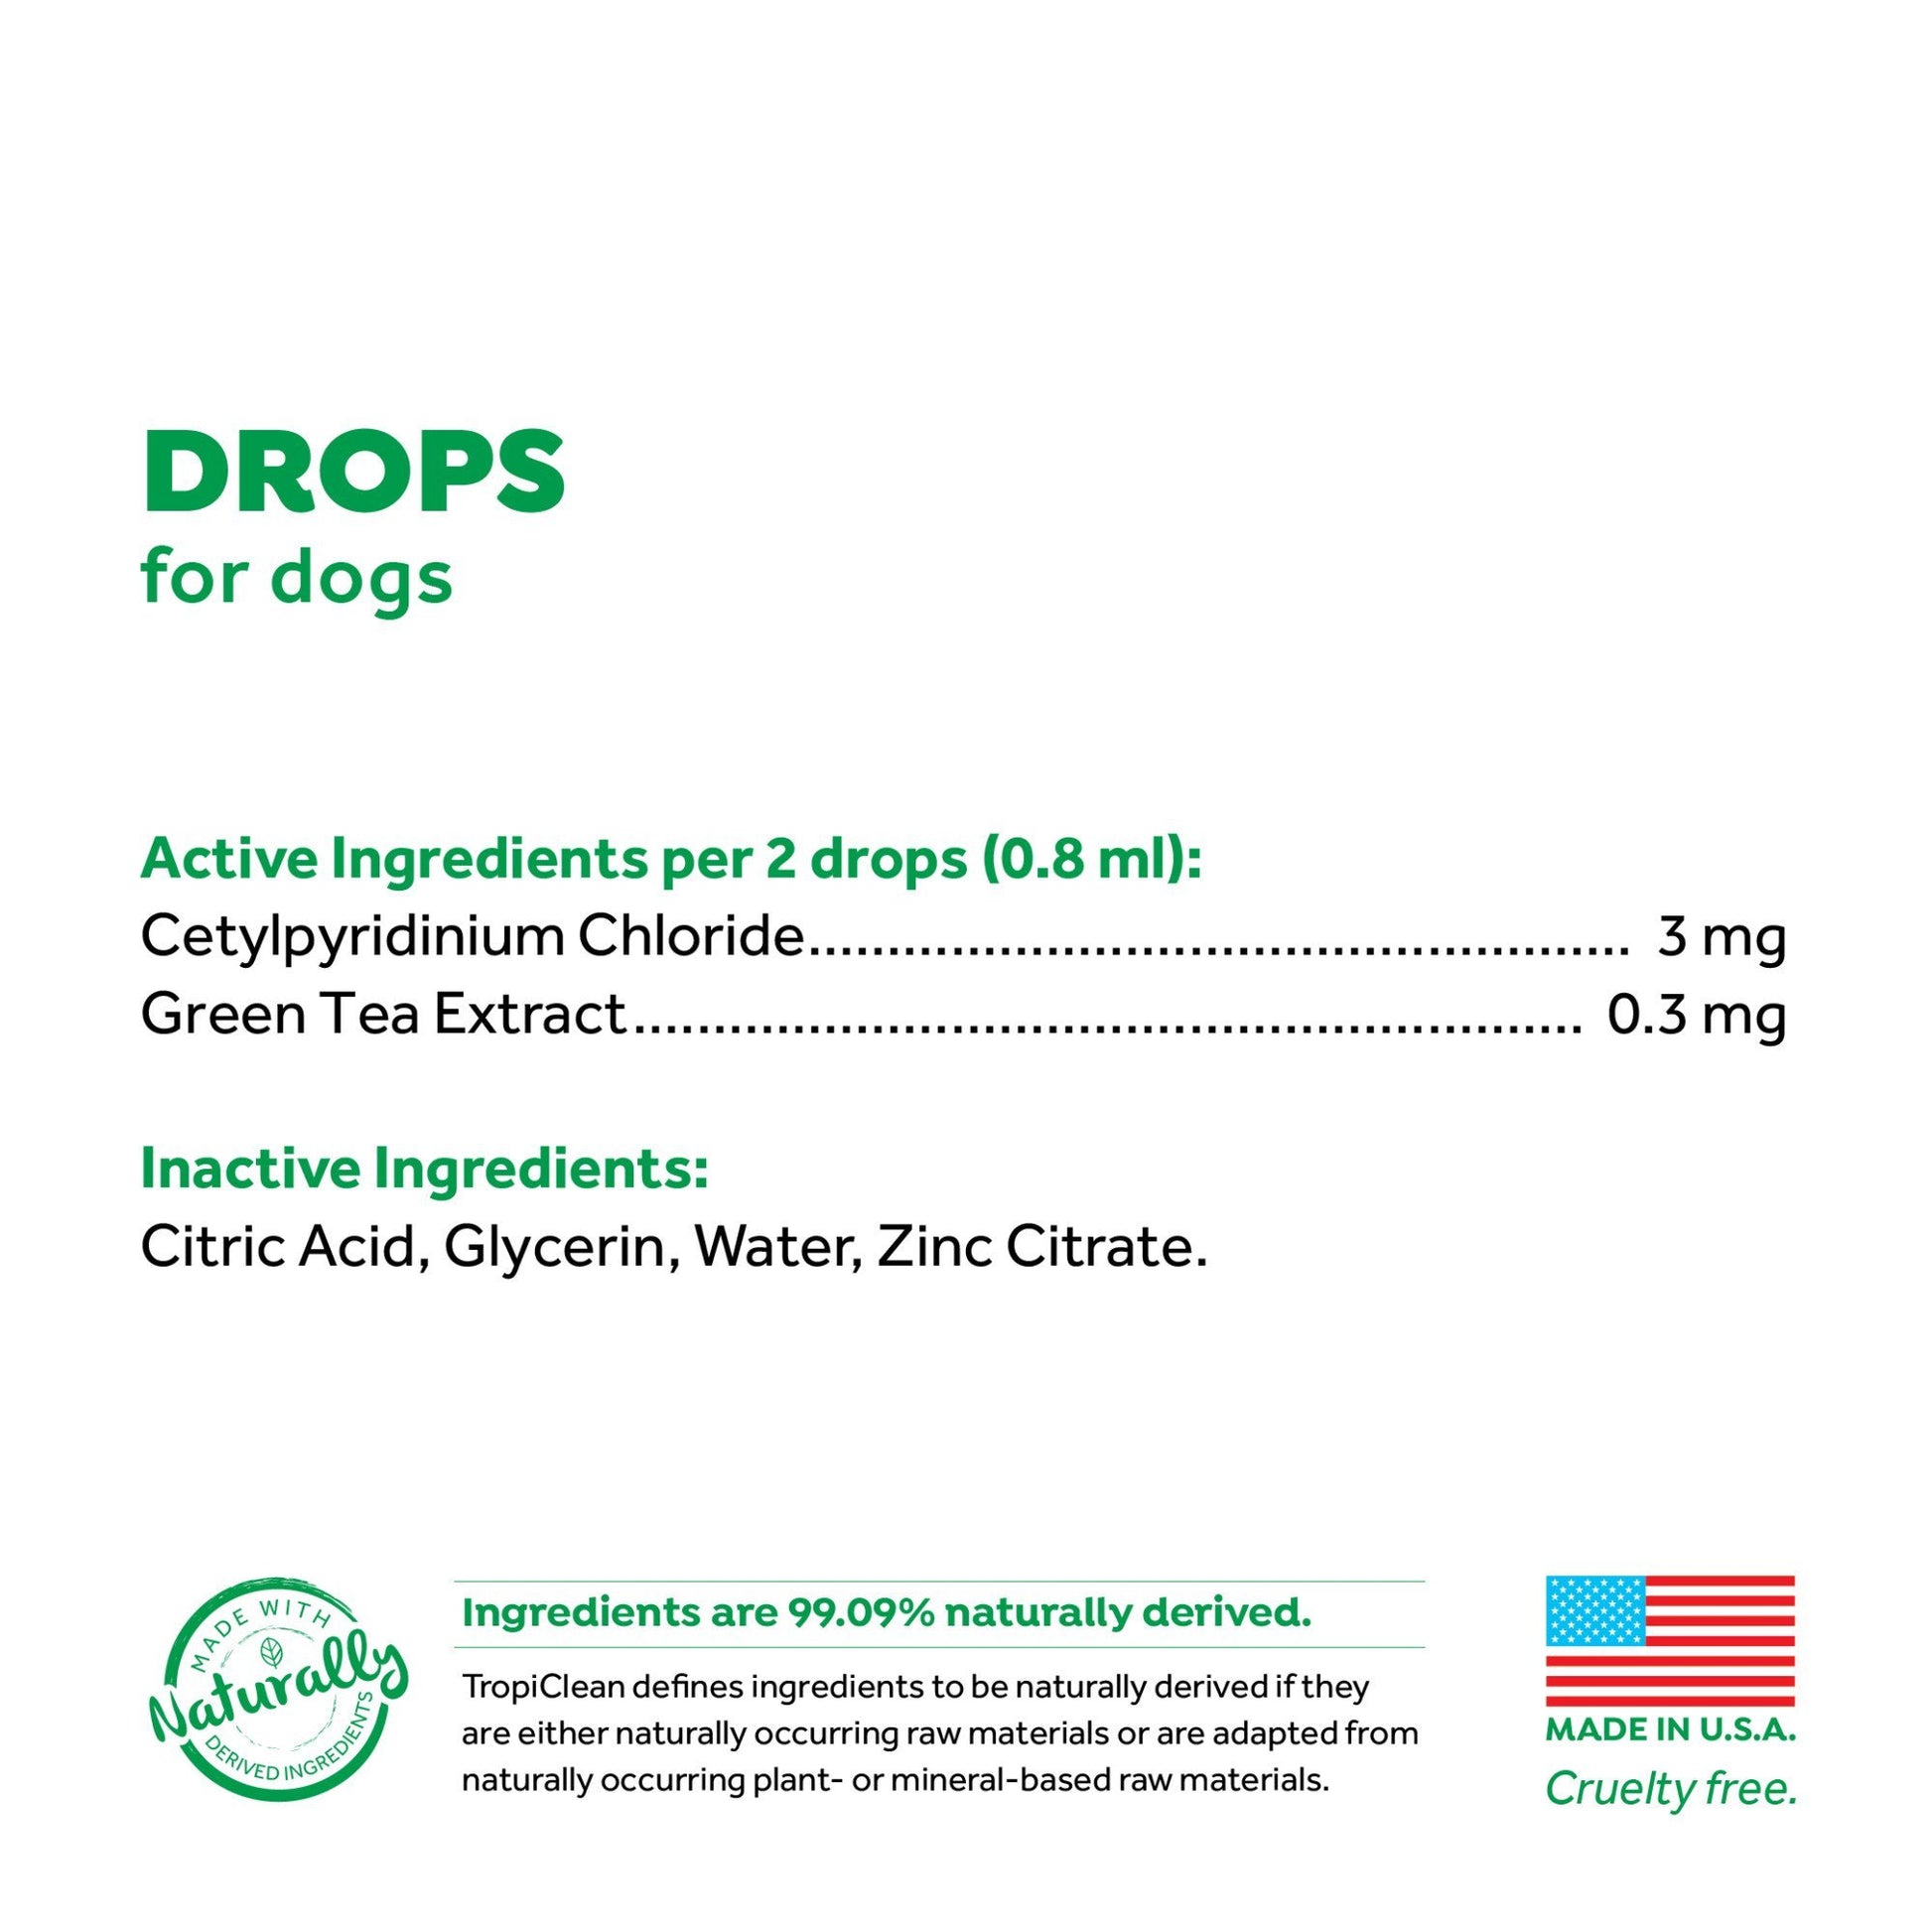 Tropiclean Fresh Breath Drops For Dogs 52ml - Woonona Petfood & Produce